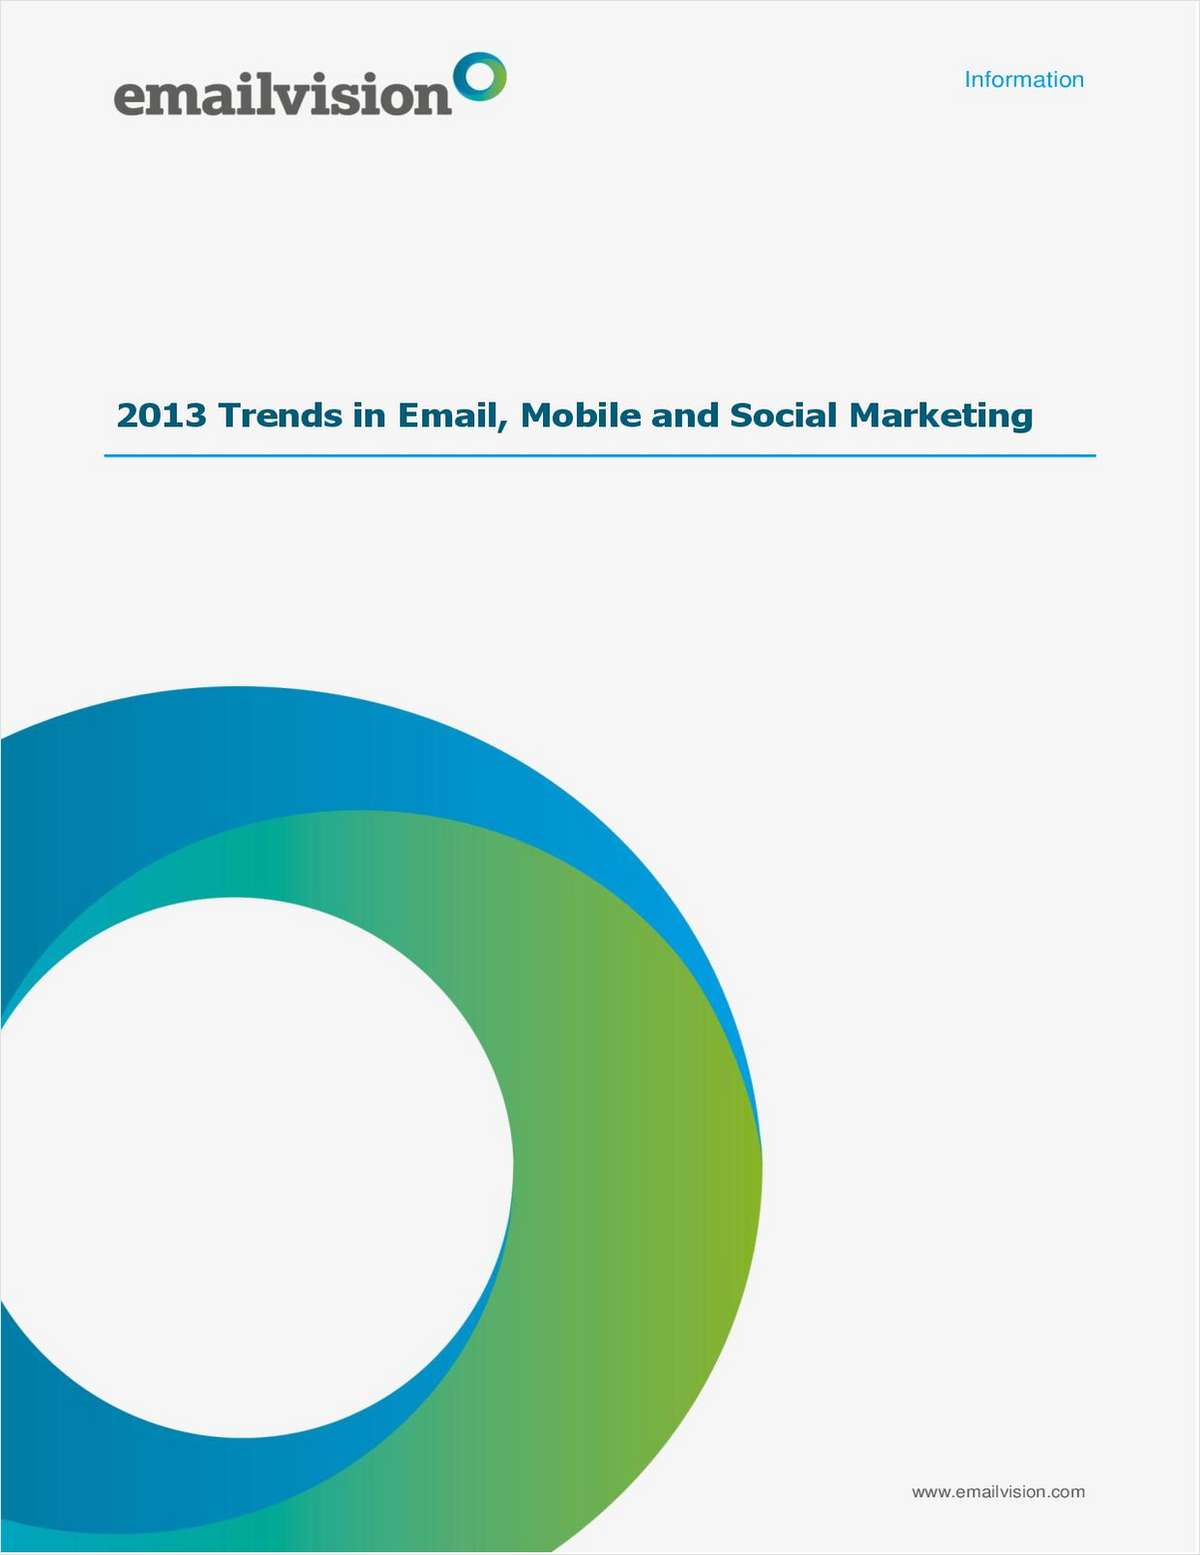 Top 10 Trends in Email, Mobile & Social Marketing